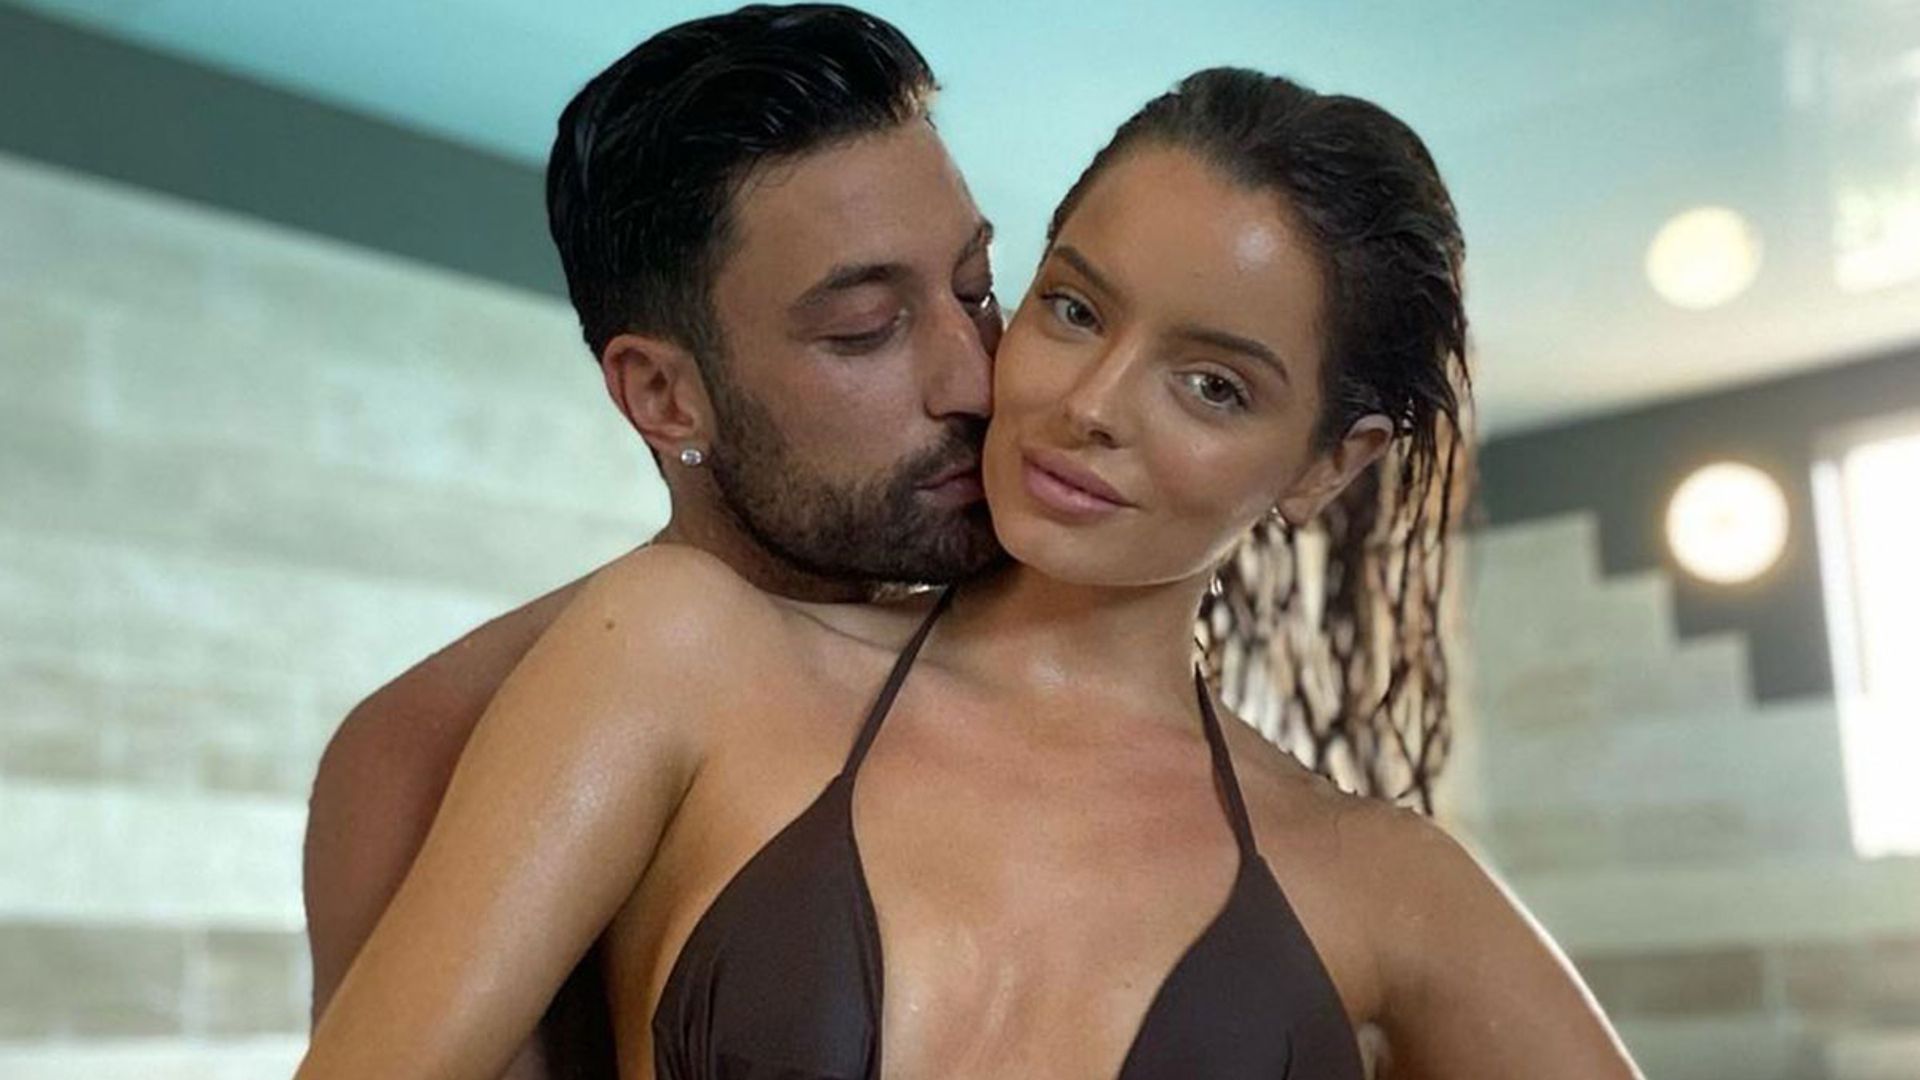 Strictly's Giovanni Pernice and Maura Higgins share glimpse inside romantic getaway